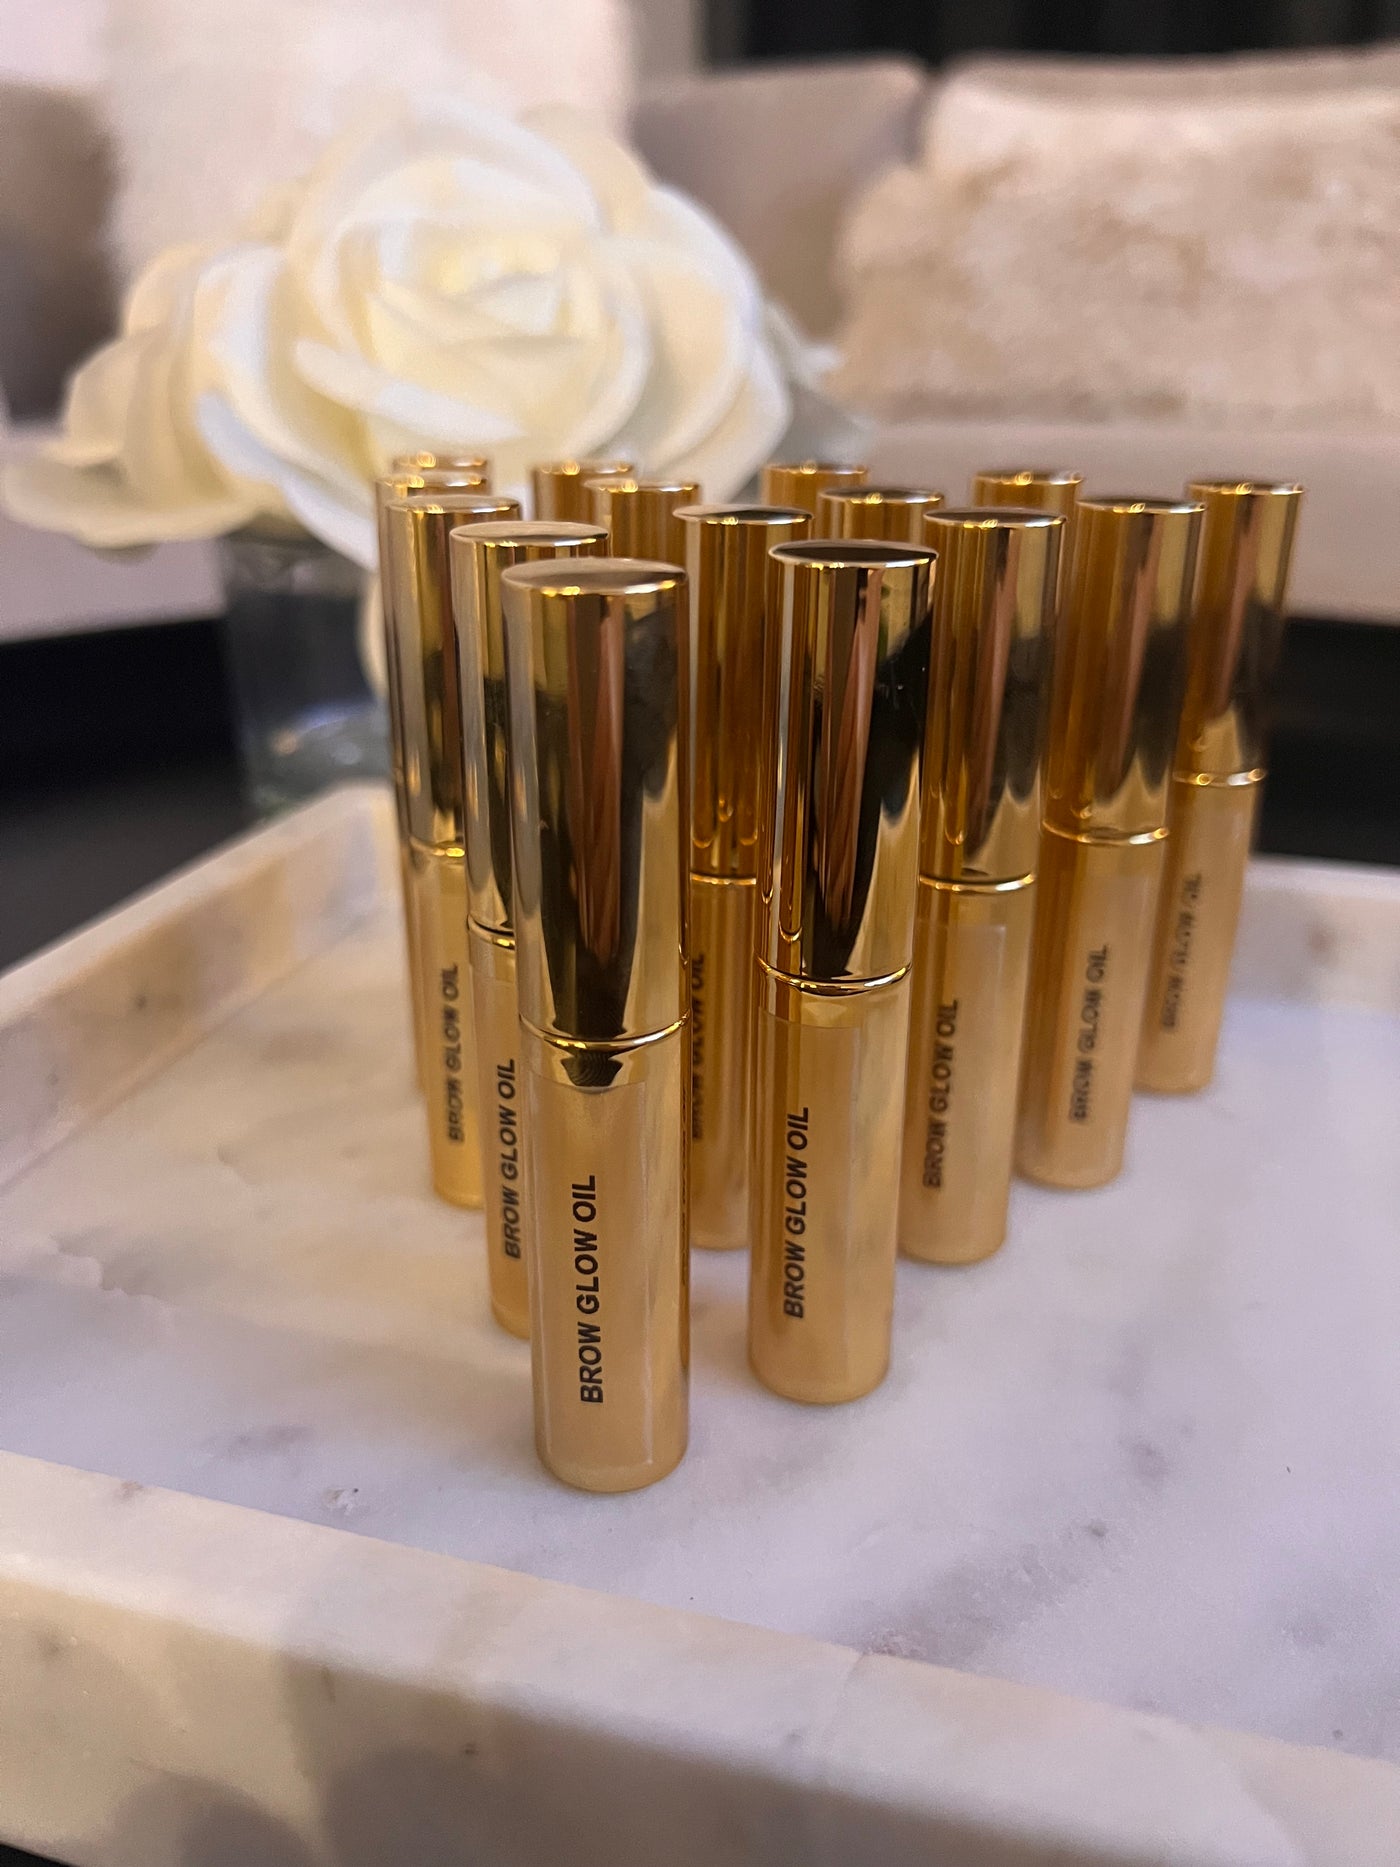 Brow and Lash Growth Oil - Luxe Lash Dolls